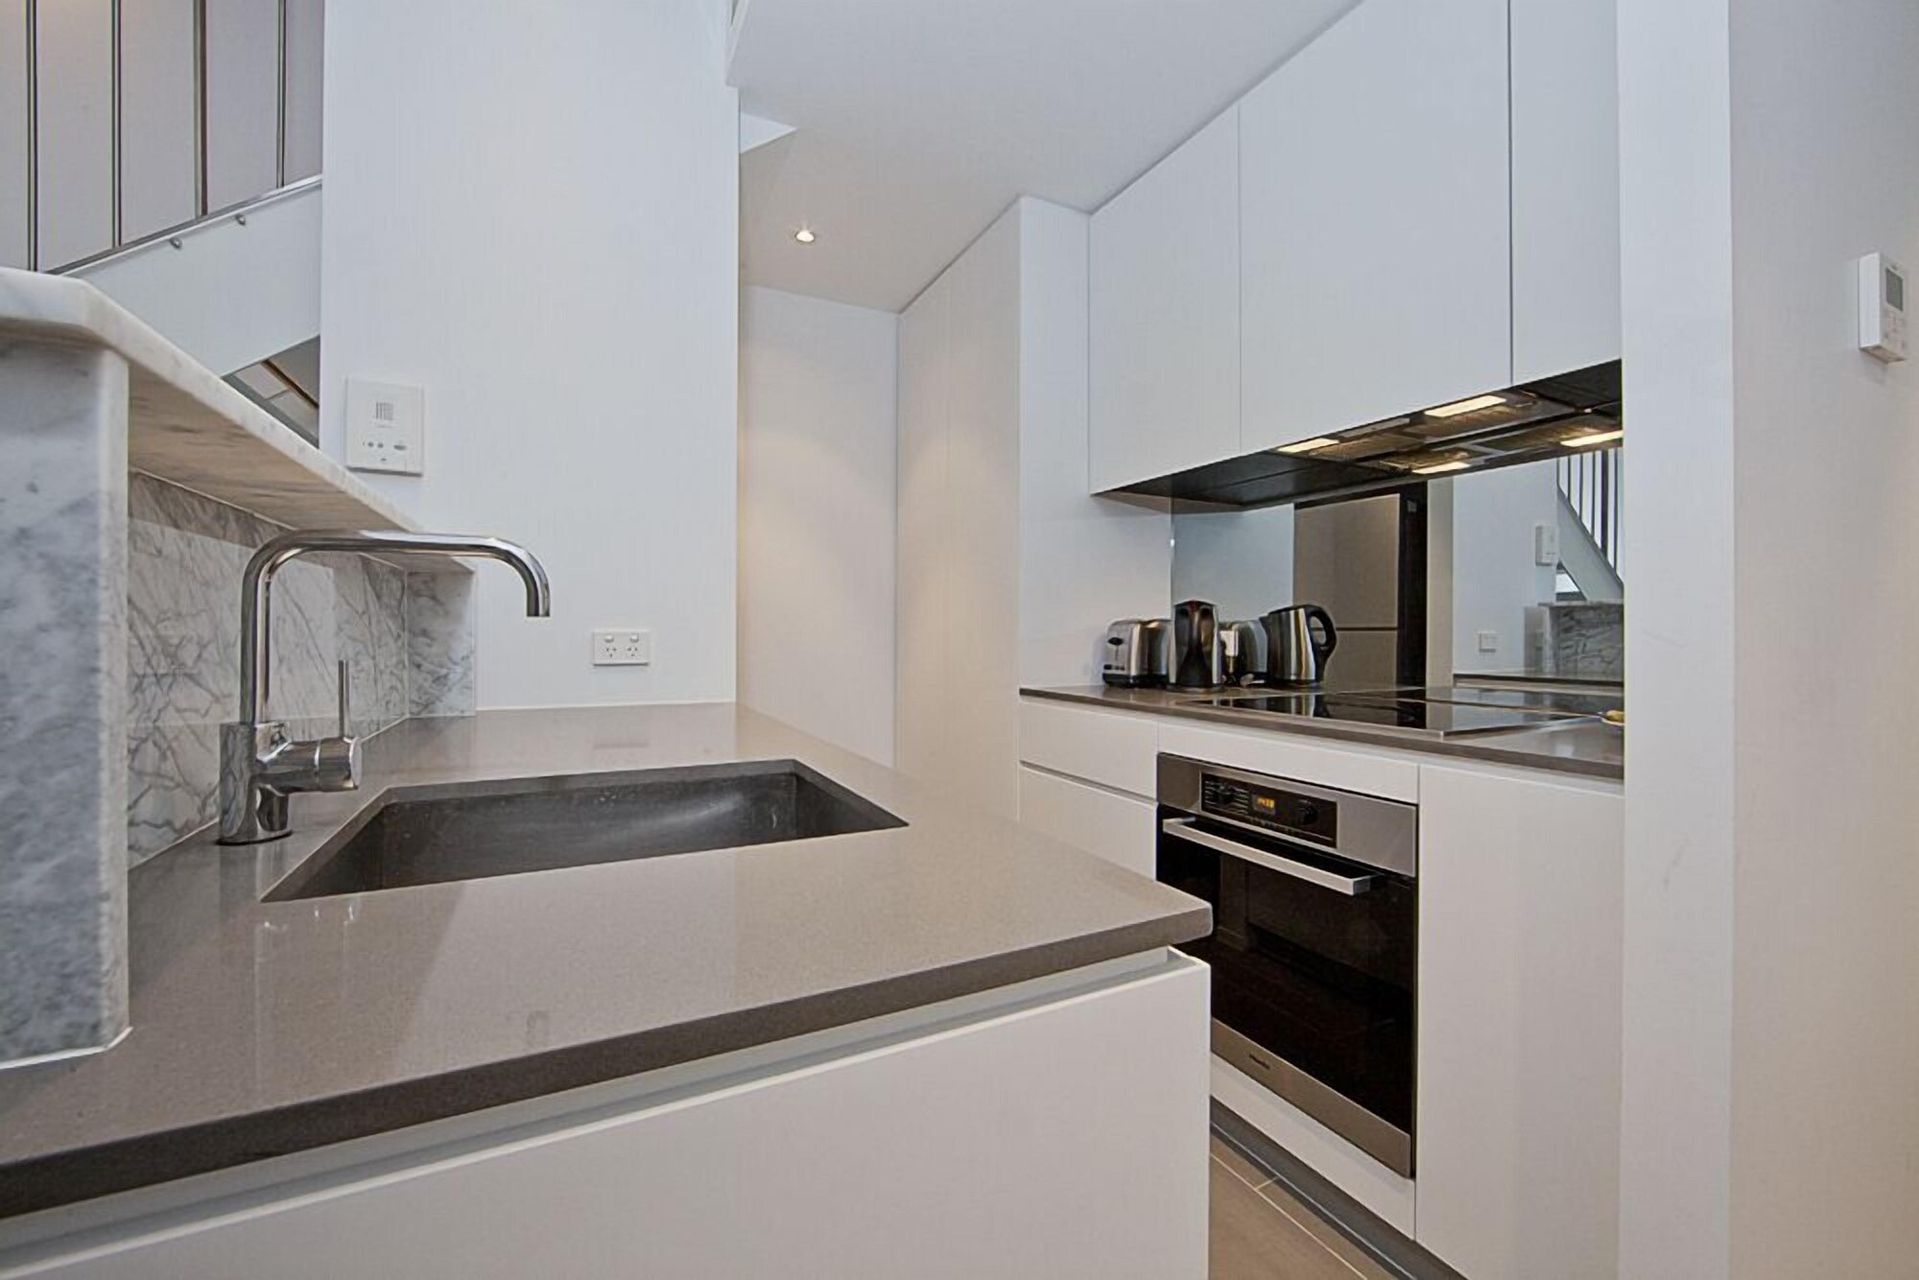 Private kitchen, Accommodate Canberra - Realm Residences, Barton